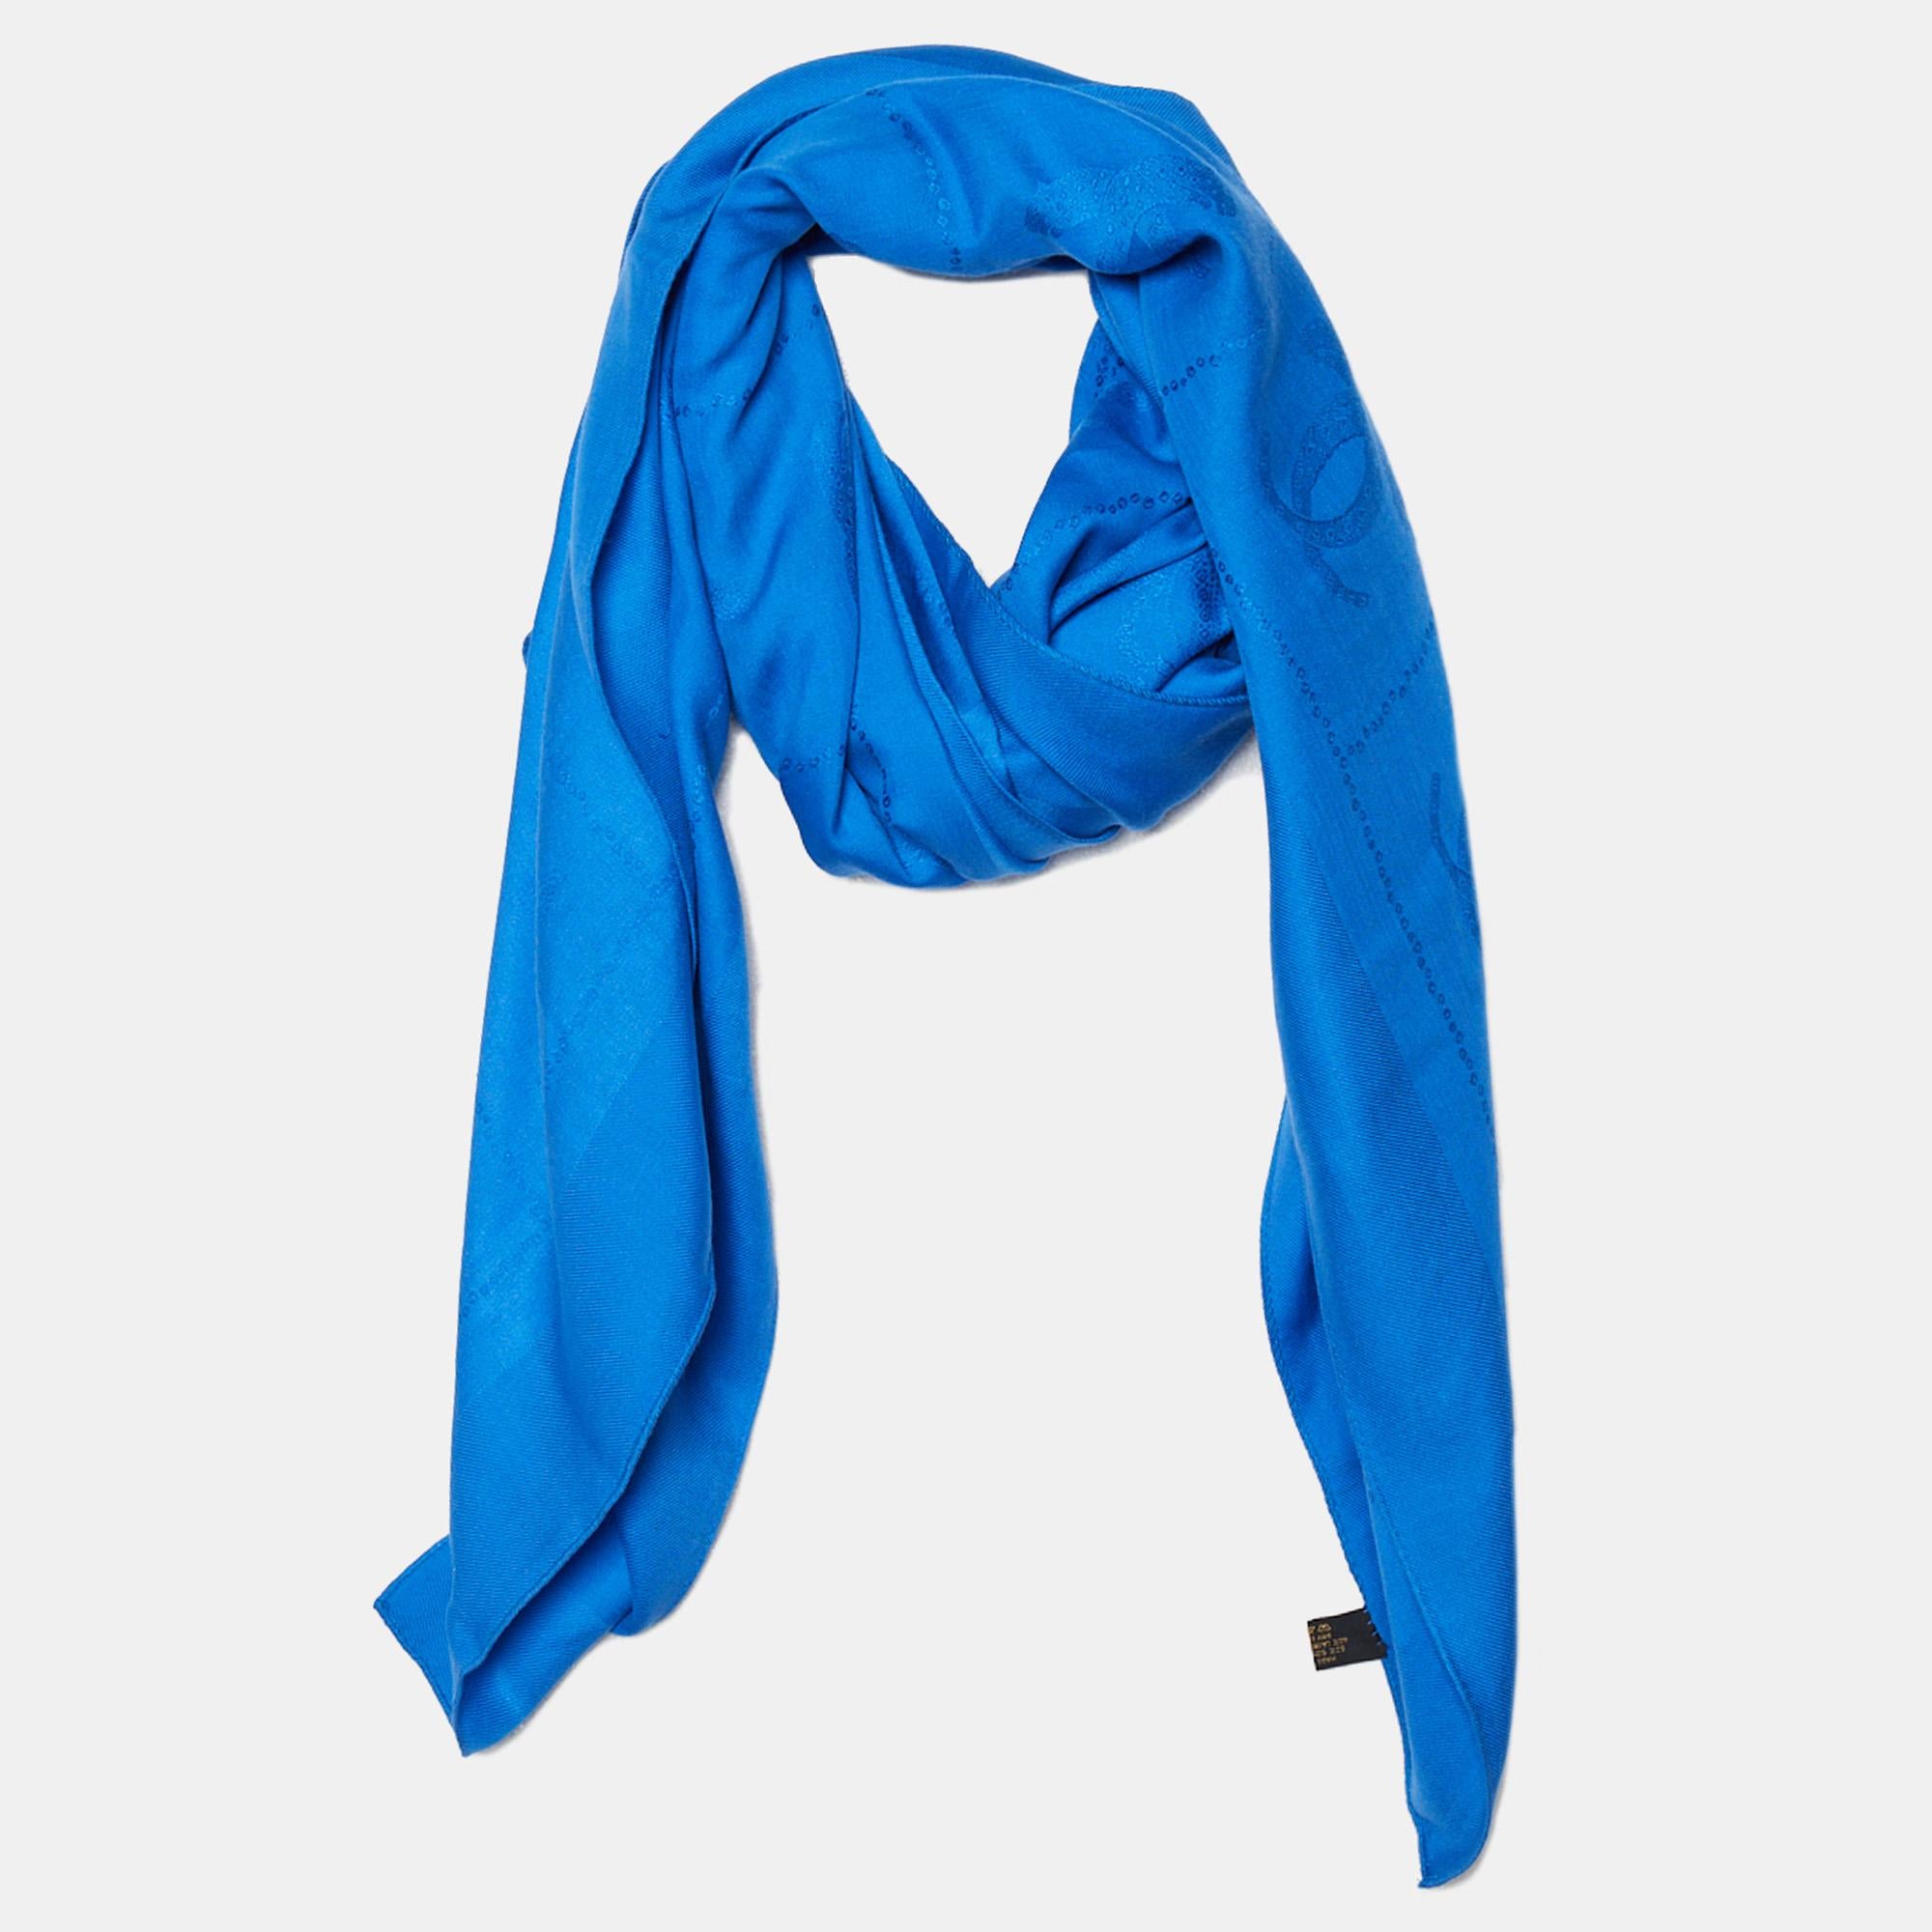 Add this scarf from Cartier in your daily ensemble for an awesome look. It is designed well with the signature panther and monogram details splayed all over. Blue in color, the scarf is cut from a blend of silk and wool and is finished with neatly